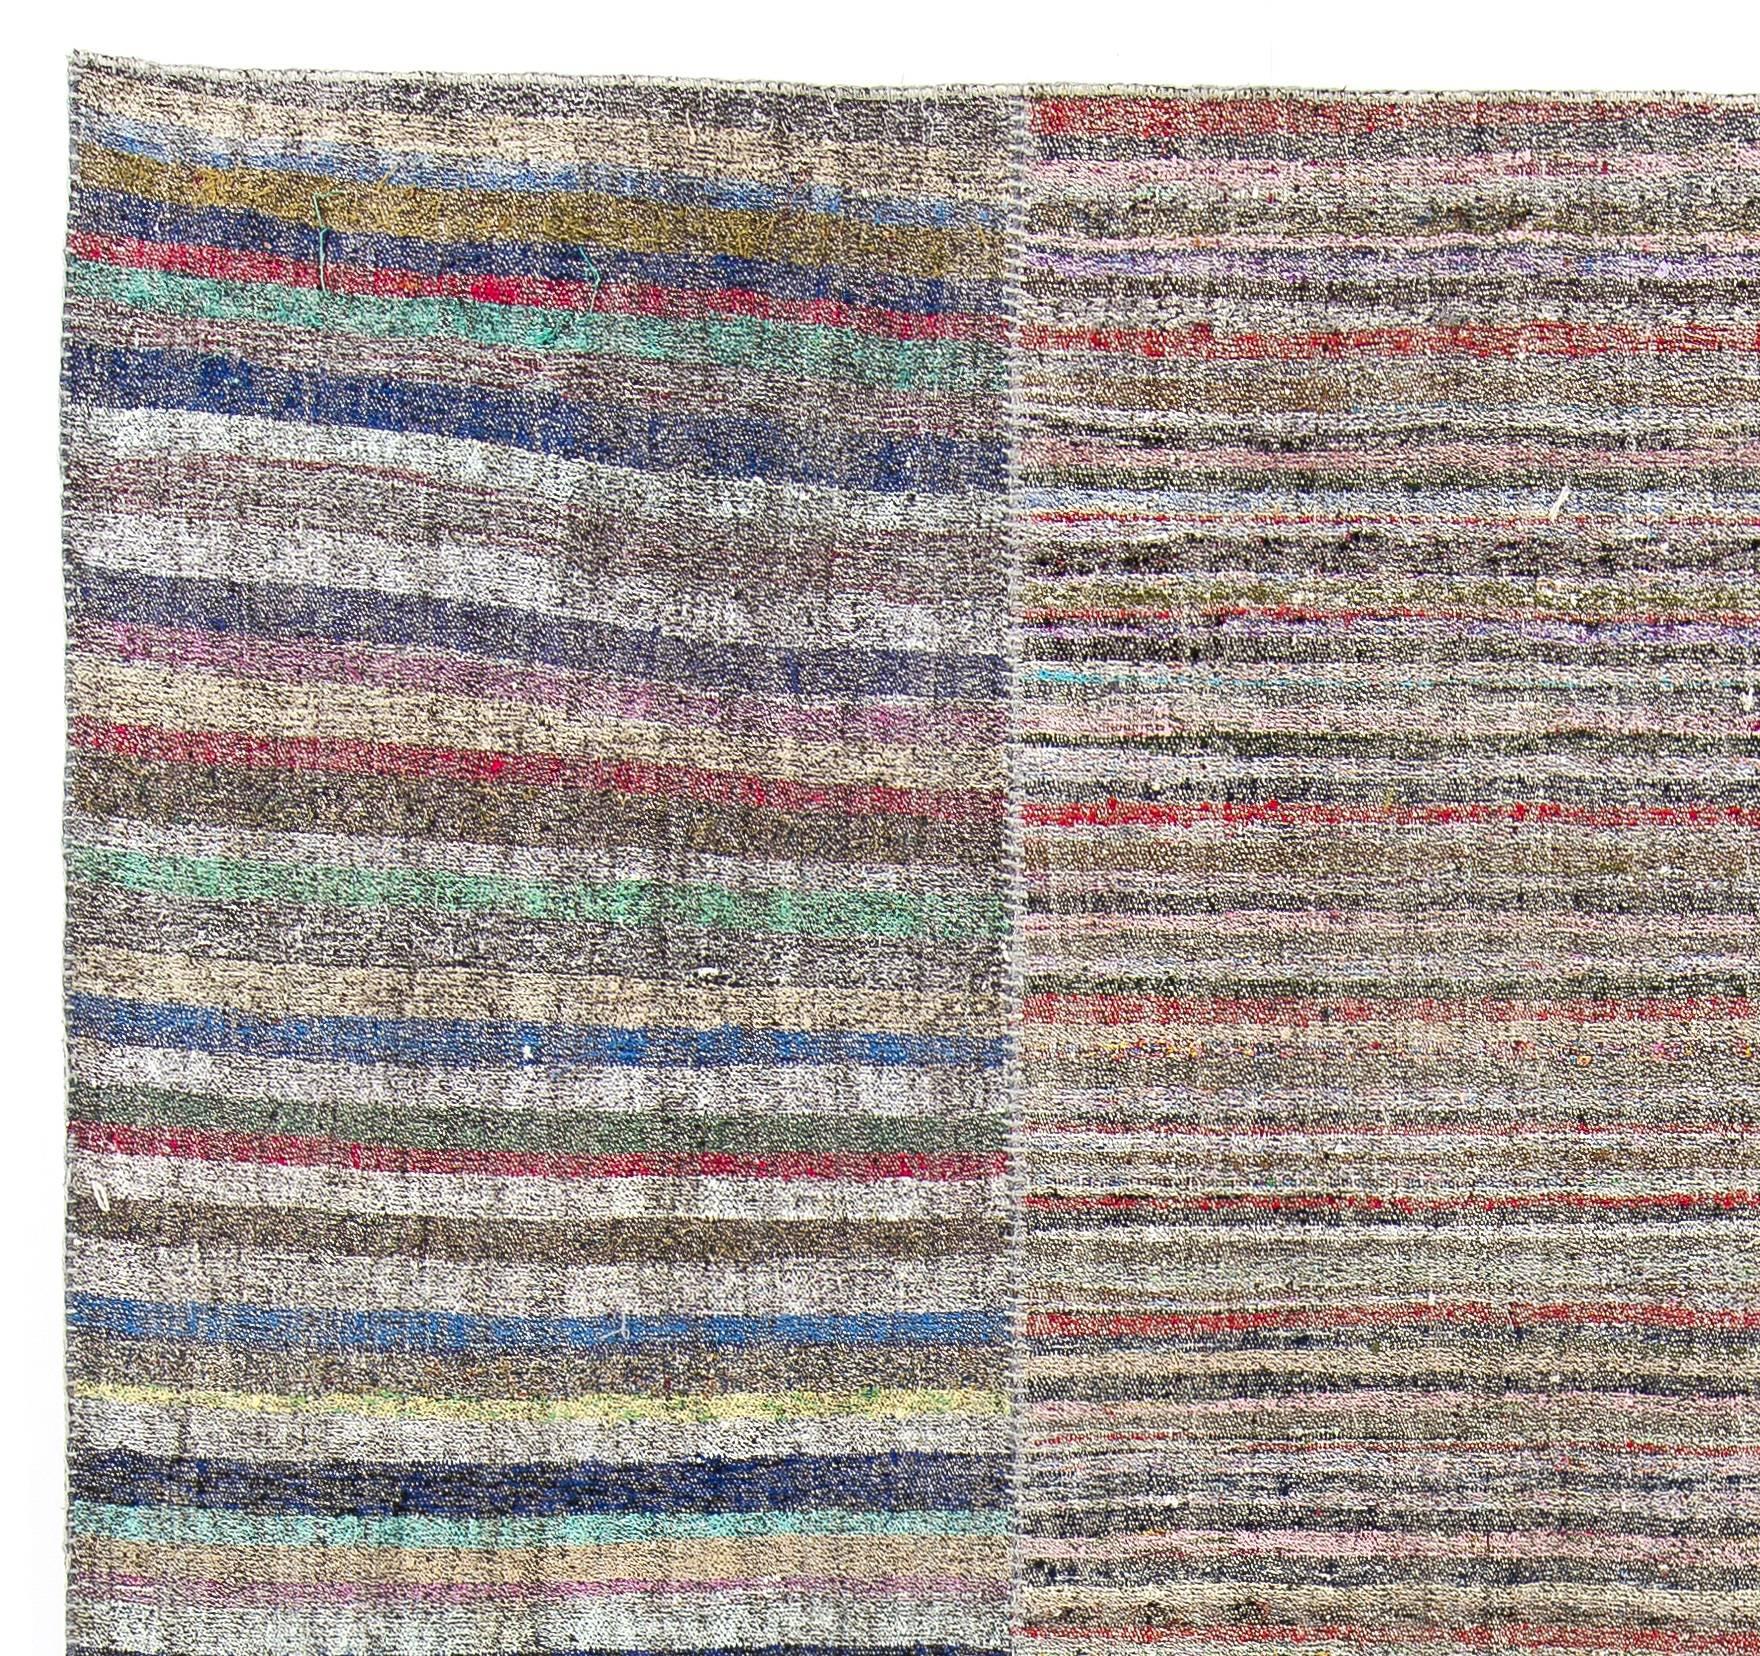 Turkish Cotton and Goat Wool Kilim Rug with Colorful Stripes